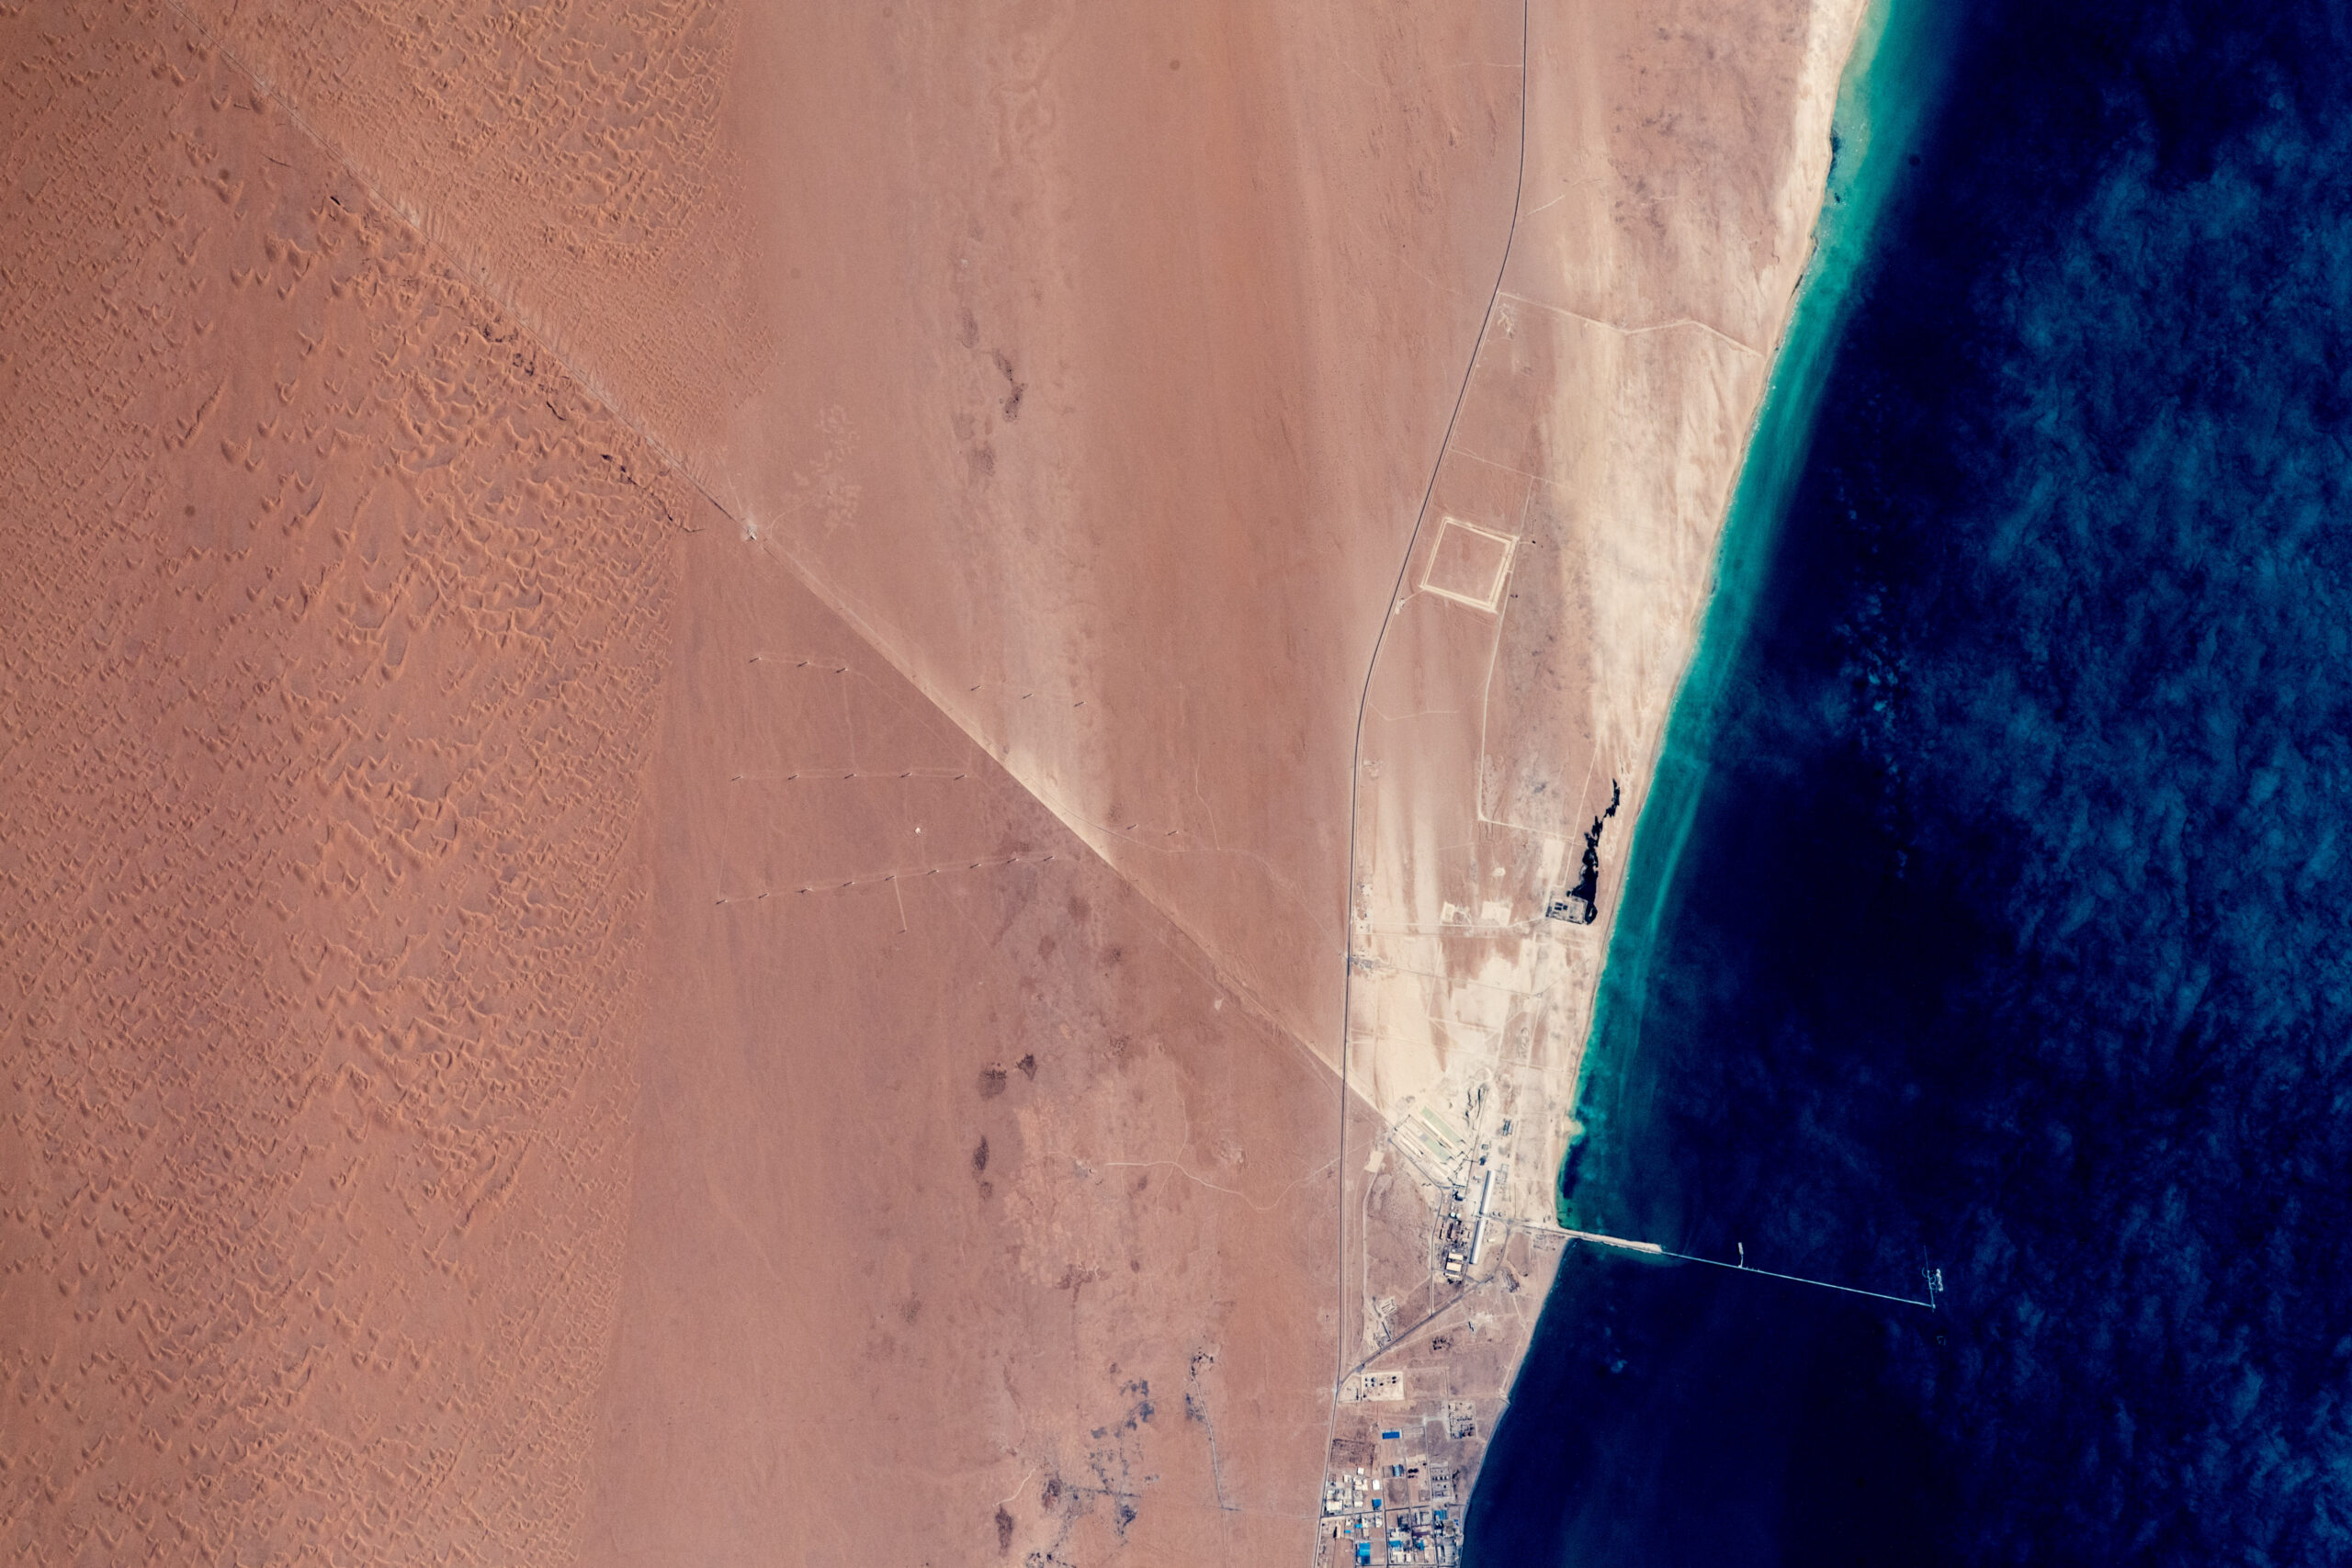 Satellite image depicting a desert and a sea.